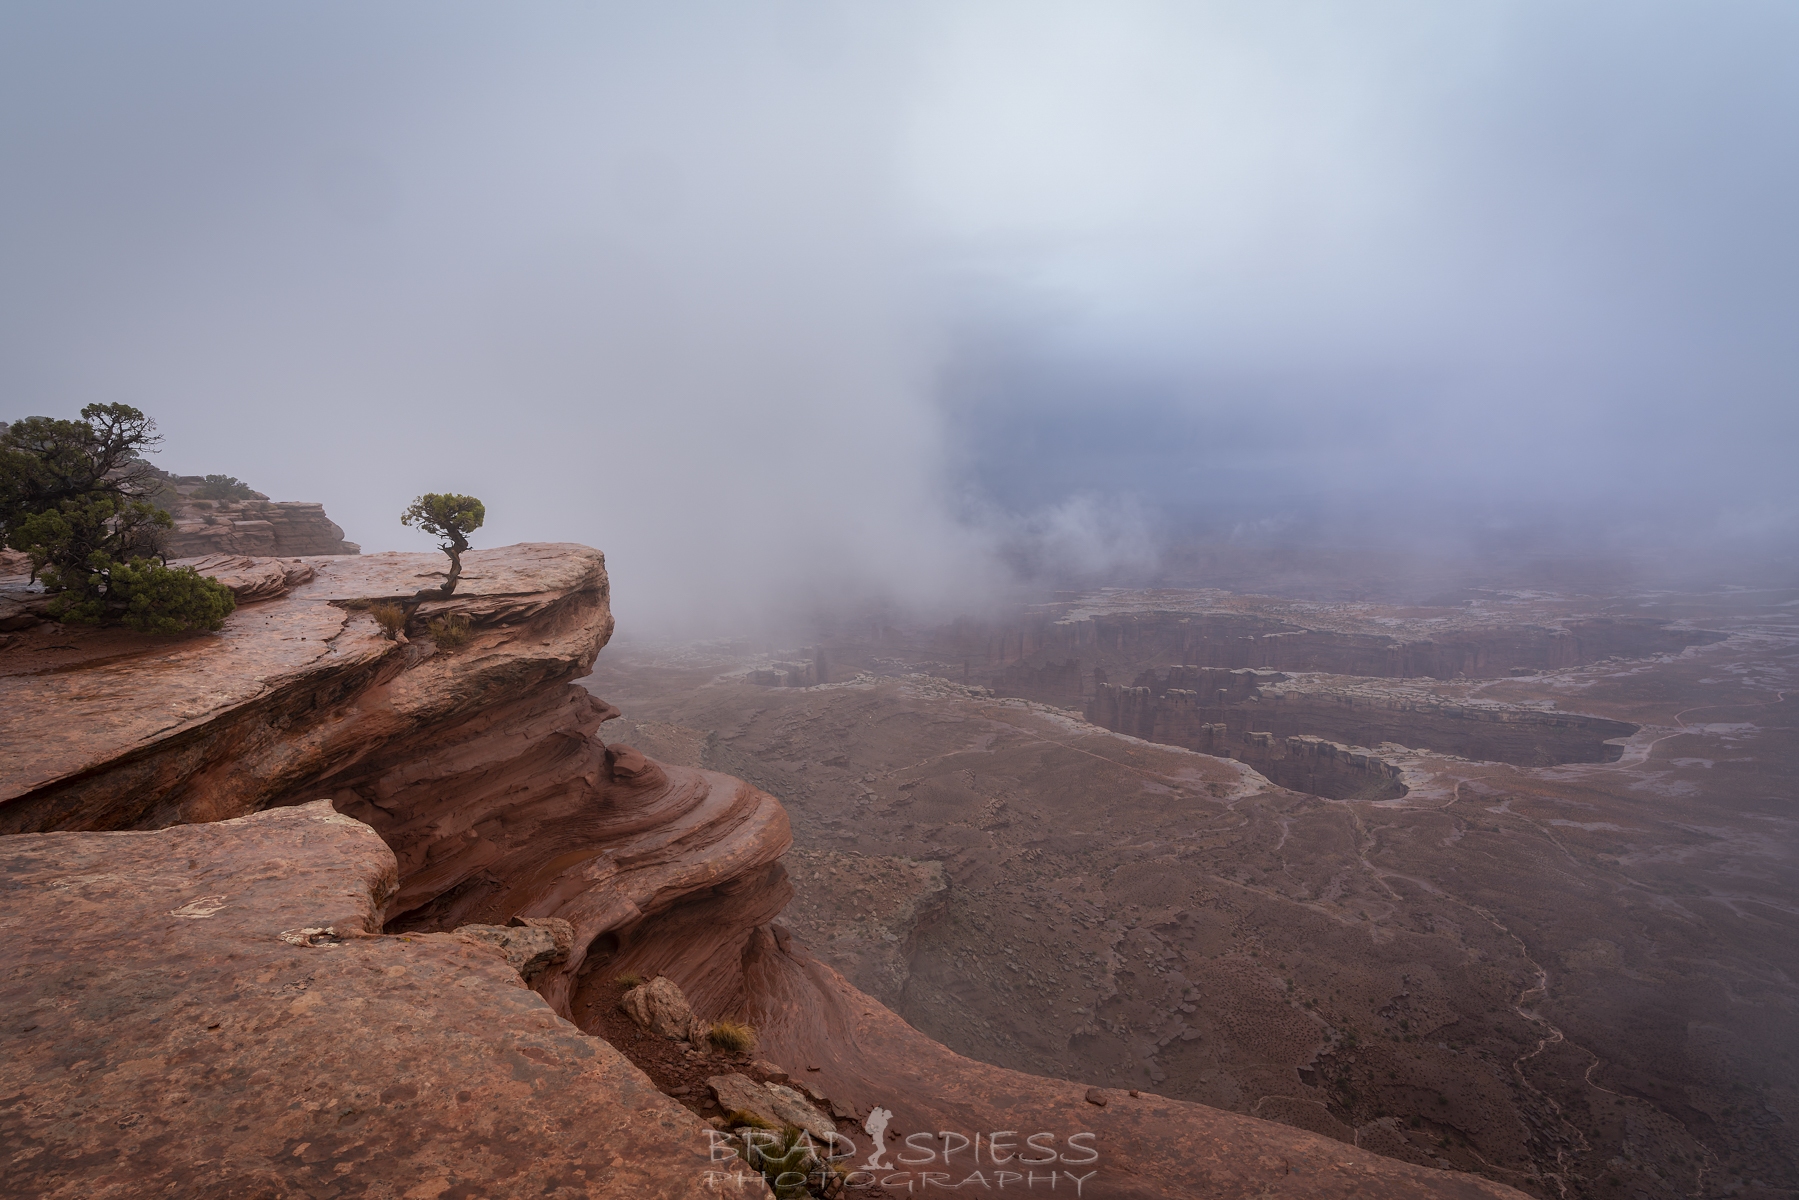 Clouds starting to lift at Grand View Point in Moab after a rainy morning.